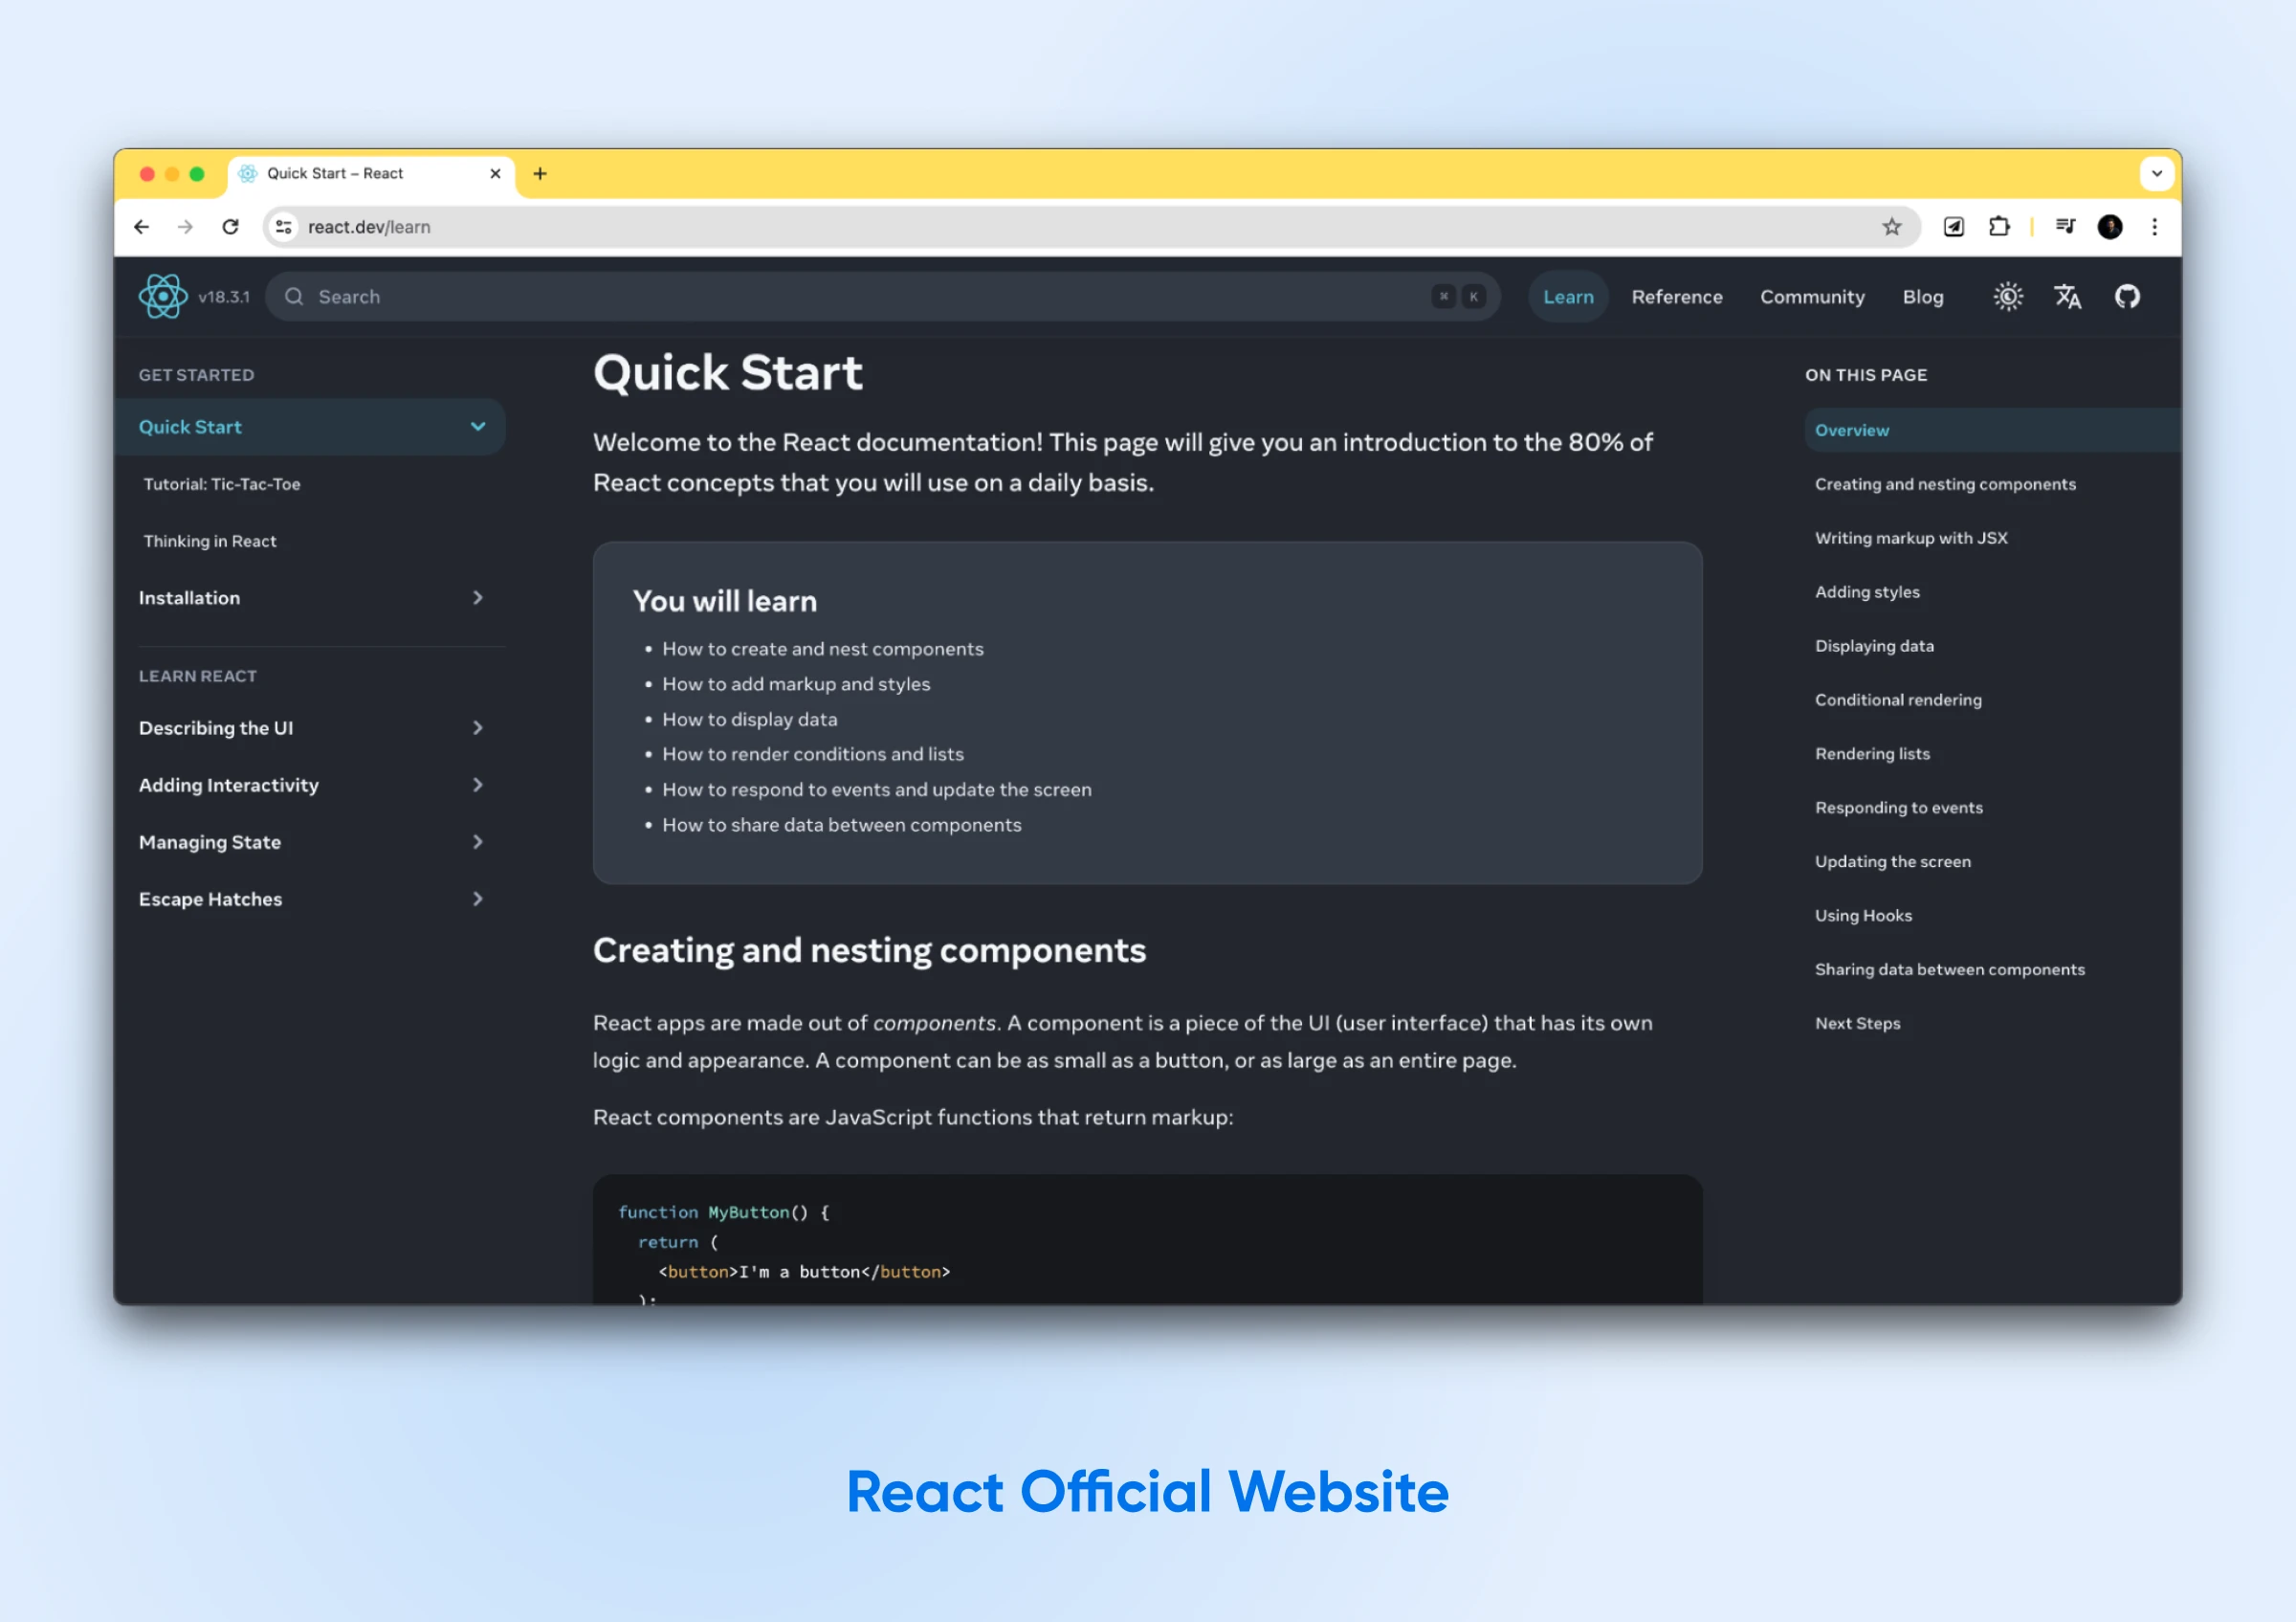 Quick Start on React's official website appears against a light blue background